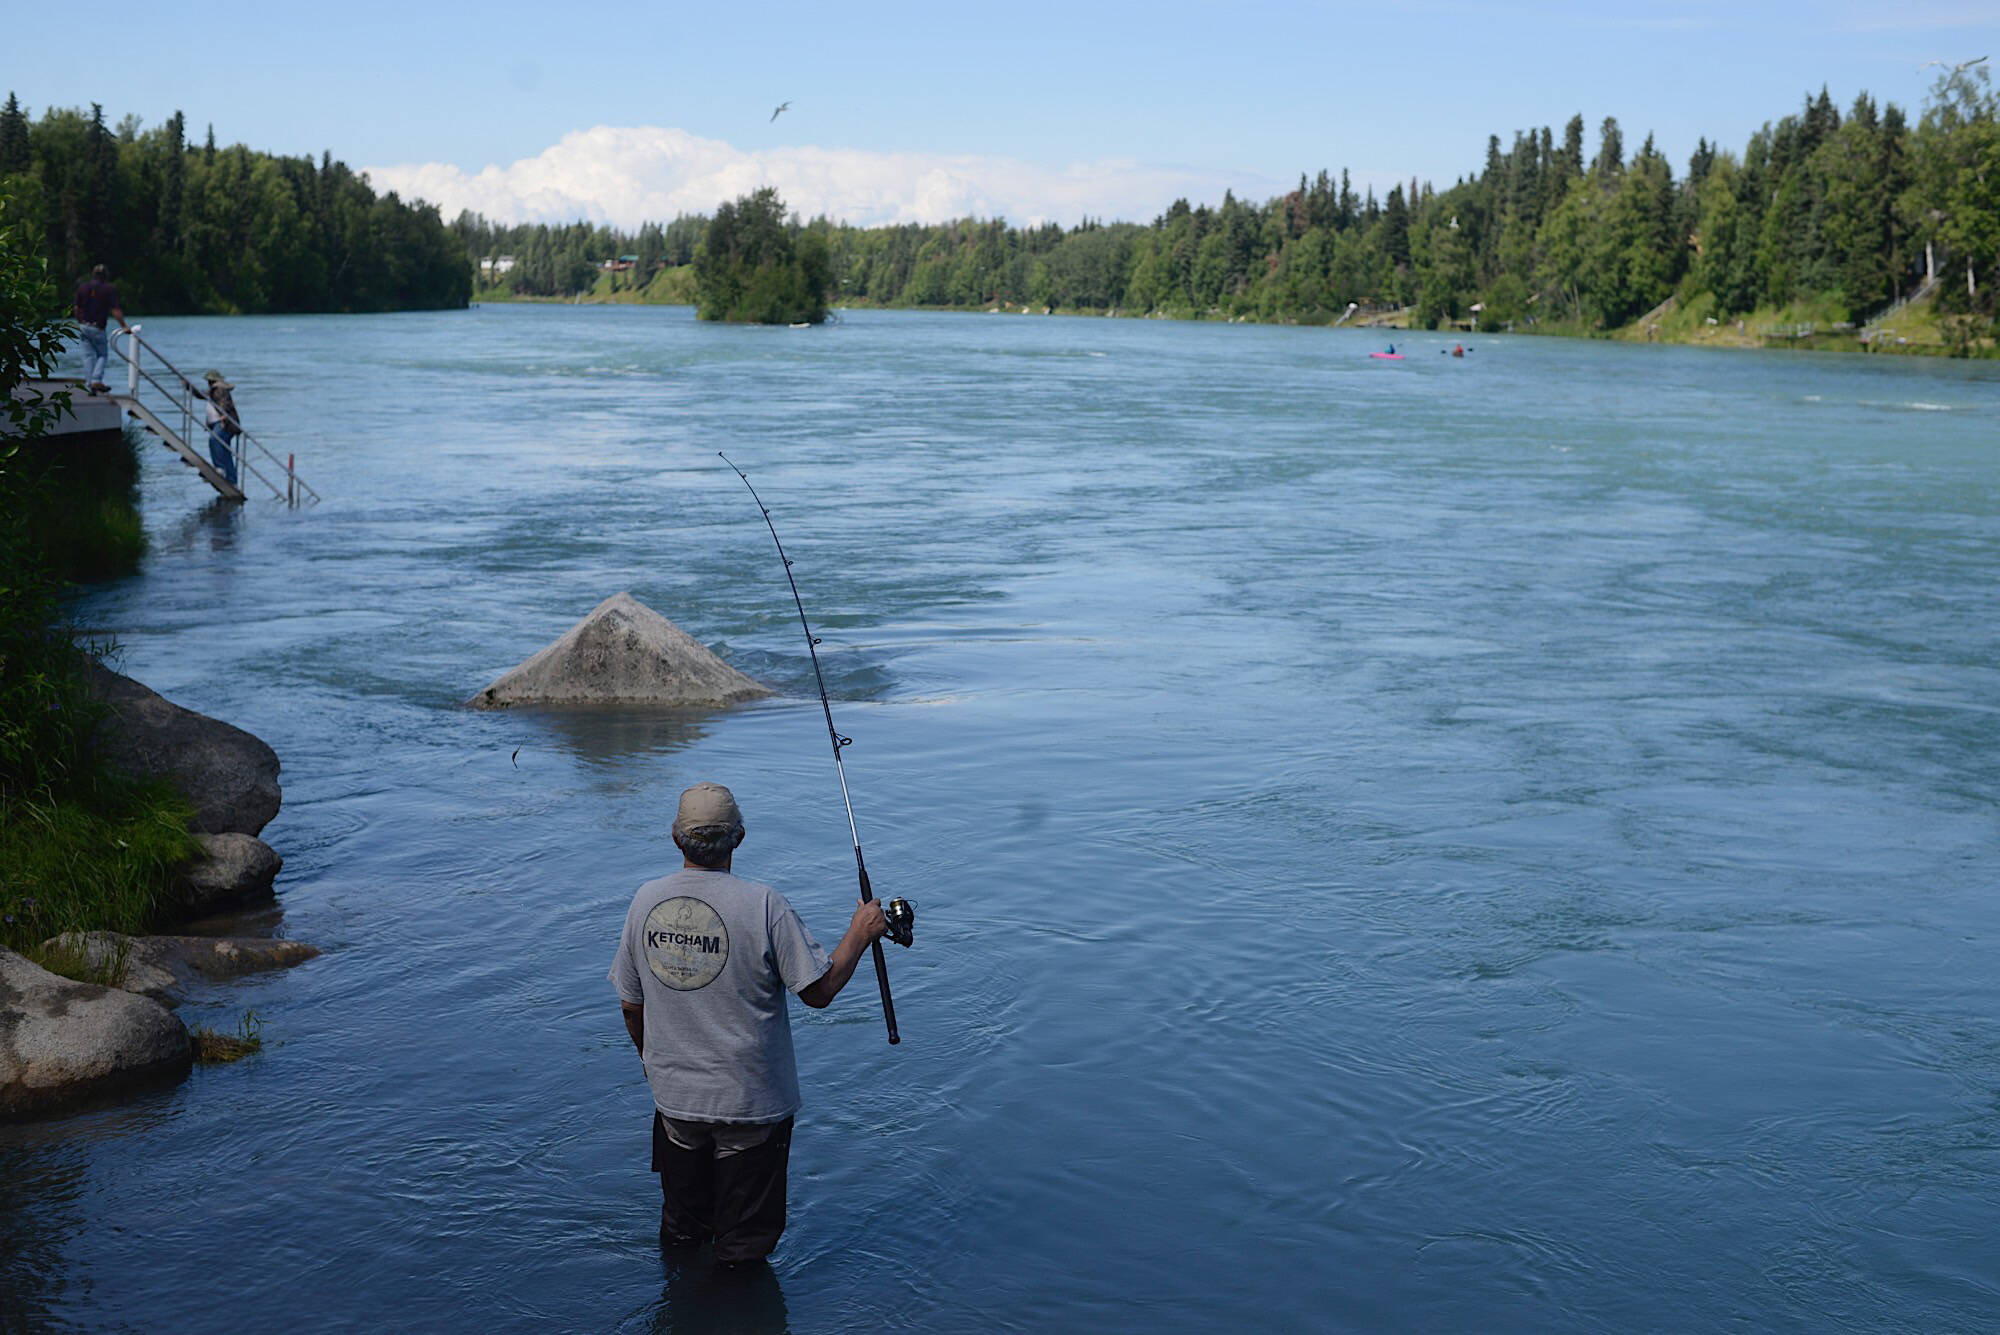 A man fishes in the Kenai River on July 16, 2018, in Soldotna, Alaska. (Peninsula Clarion/file)